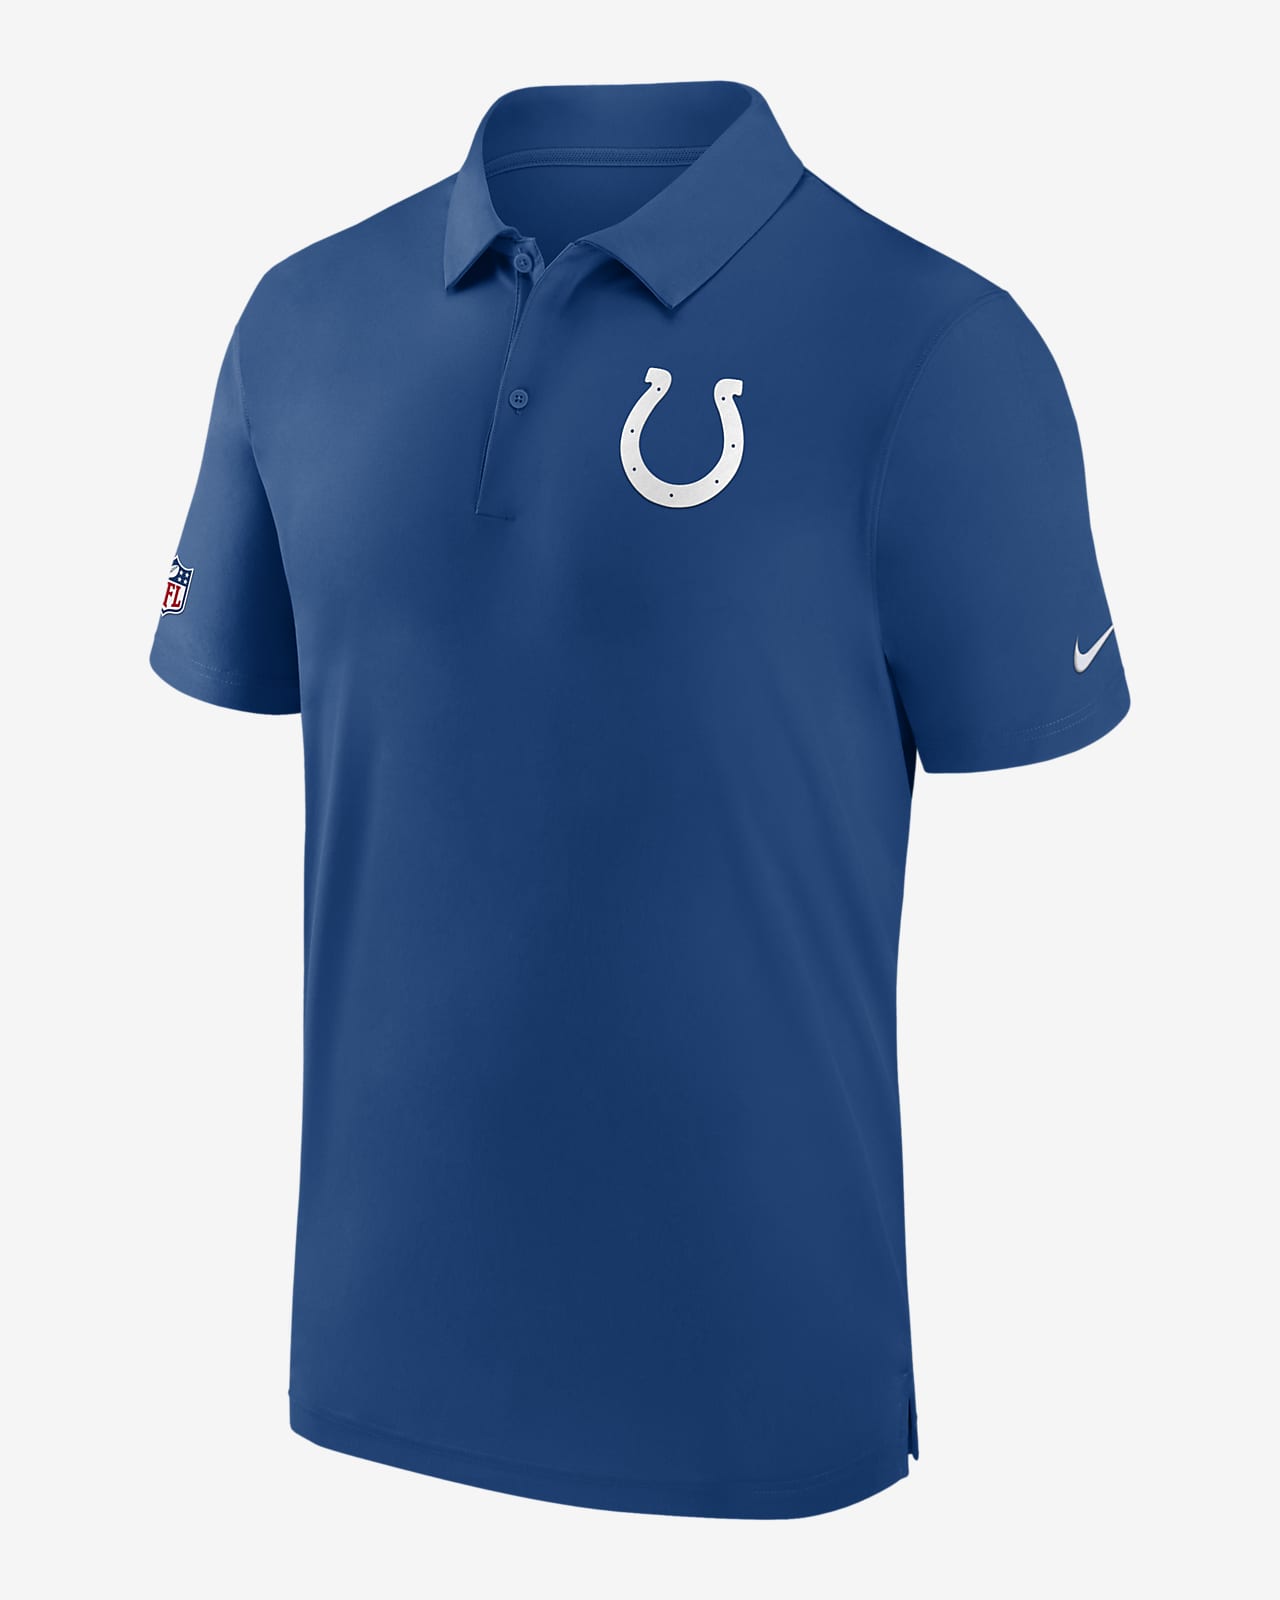 Indianapolis Colts Sideline Coach Men’s Nike Dri-FIT NFL Polo